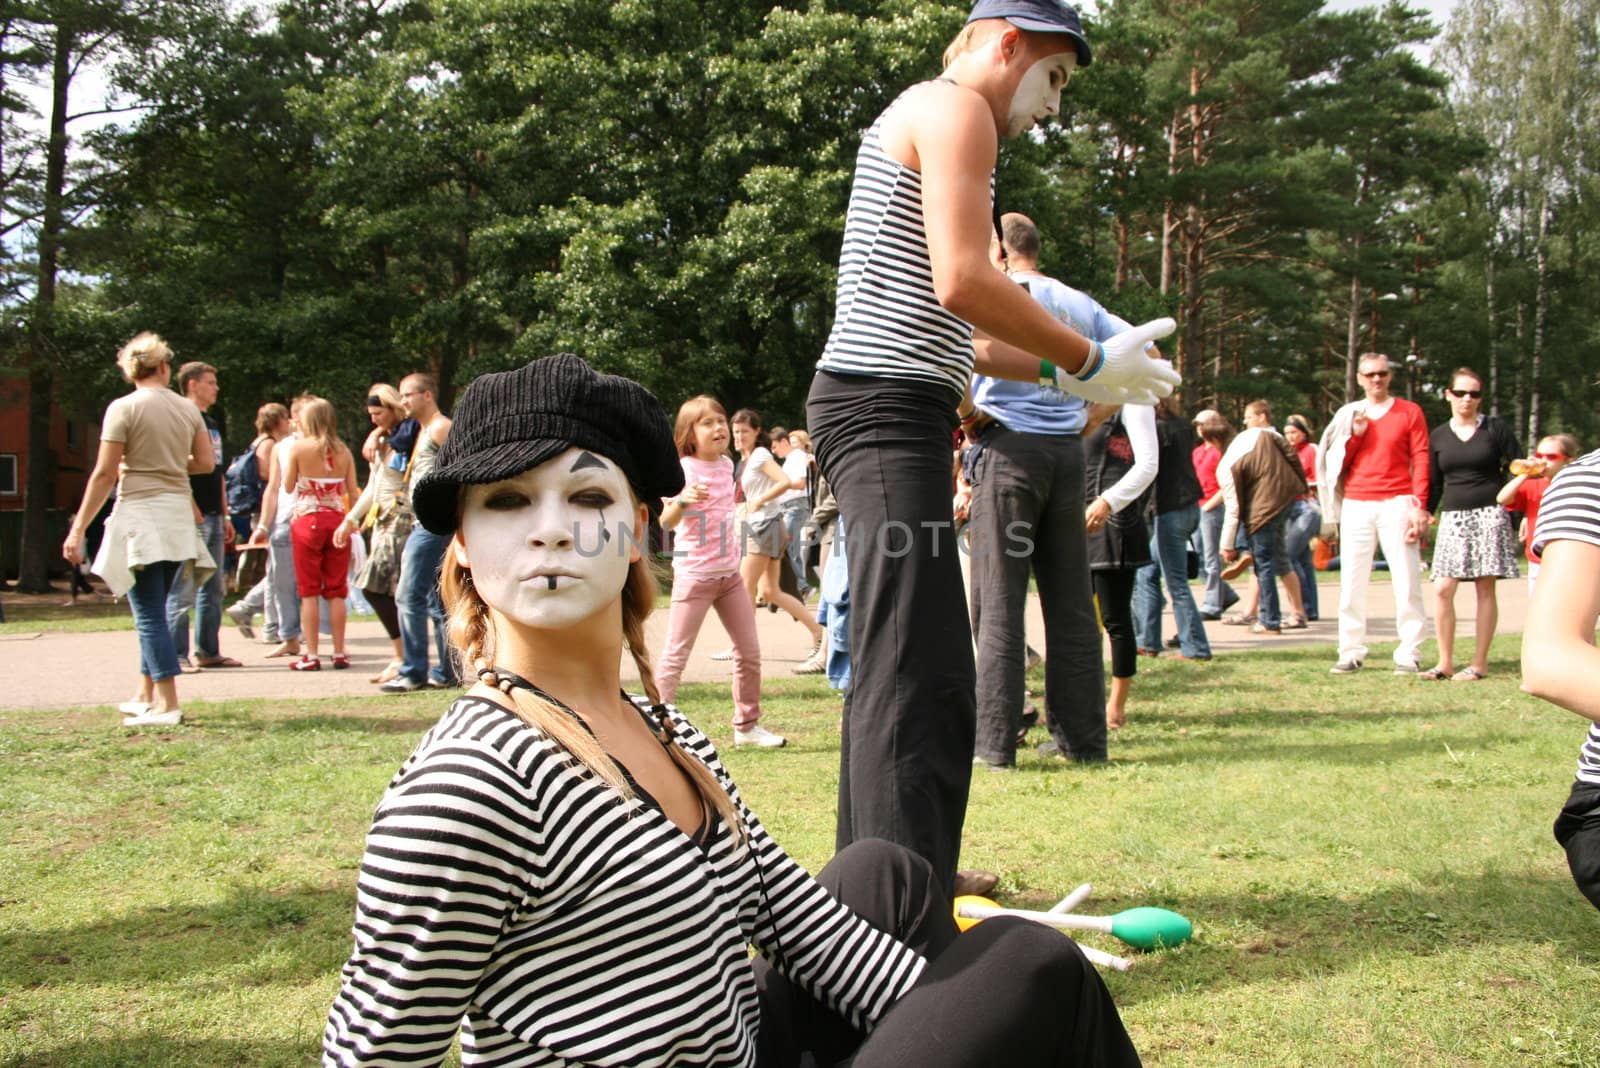 Mimes entertaining public at Positivus AB Festival in Salacgriva, Latvia, 27 July 2007